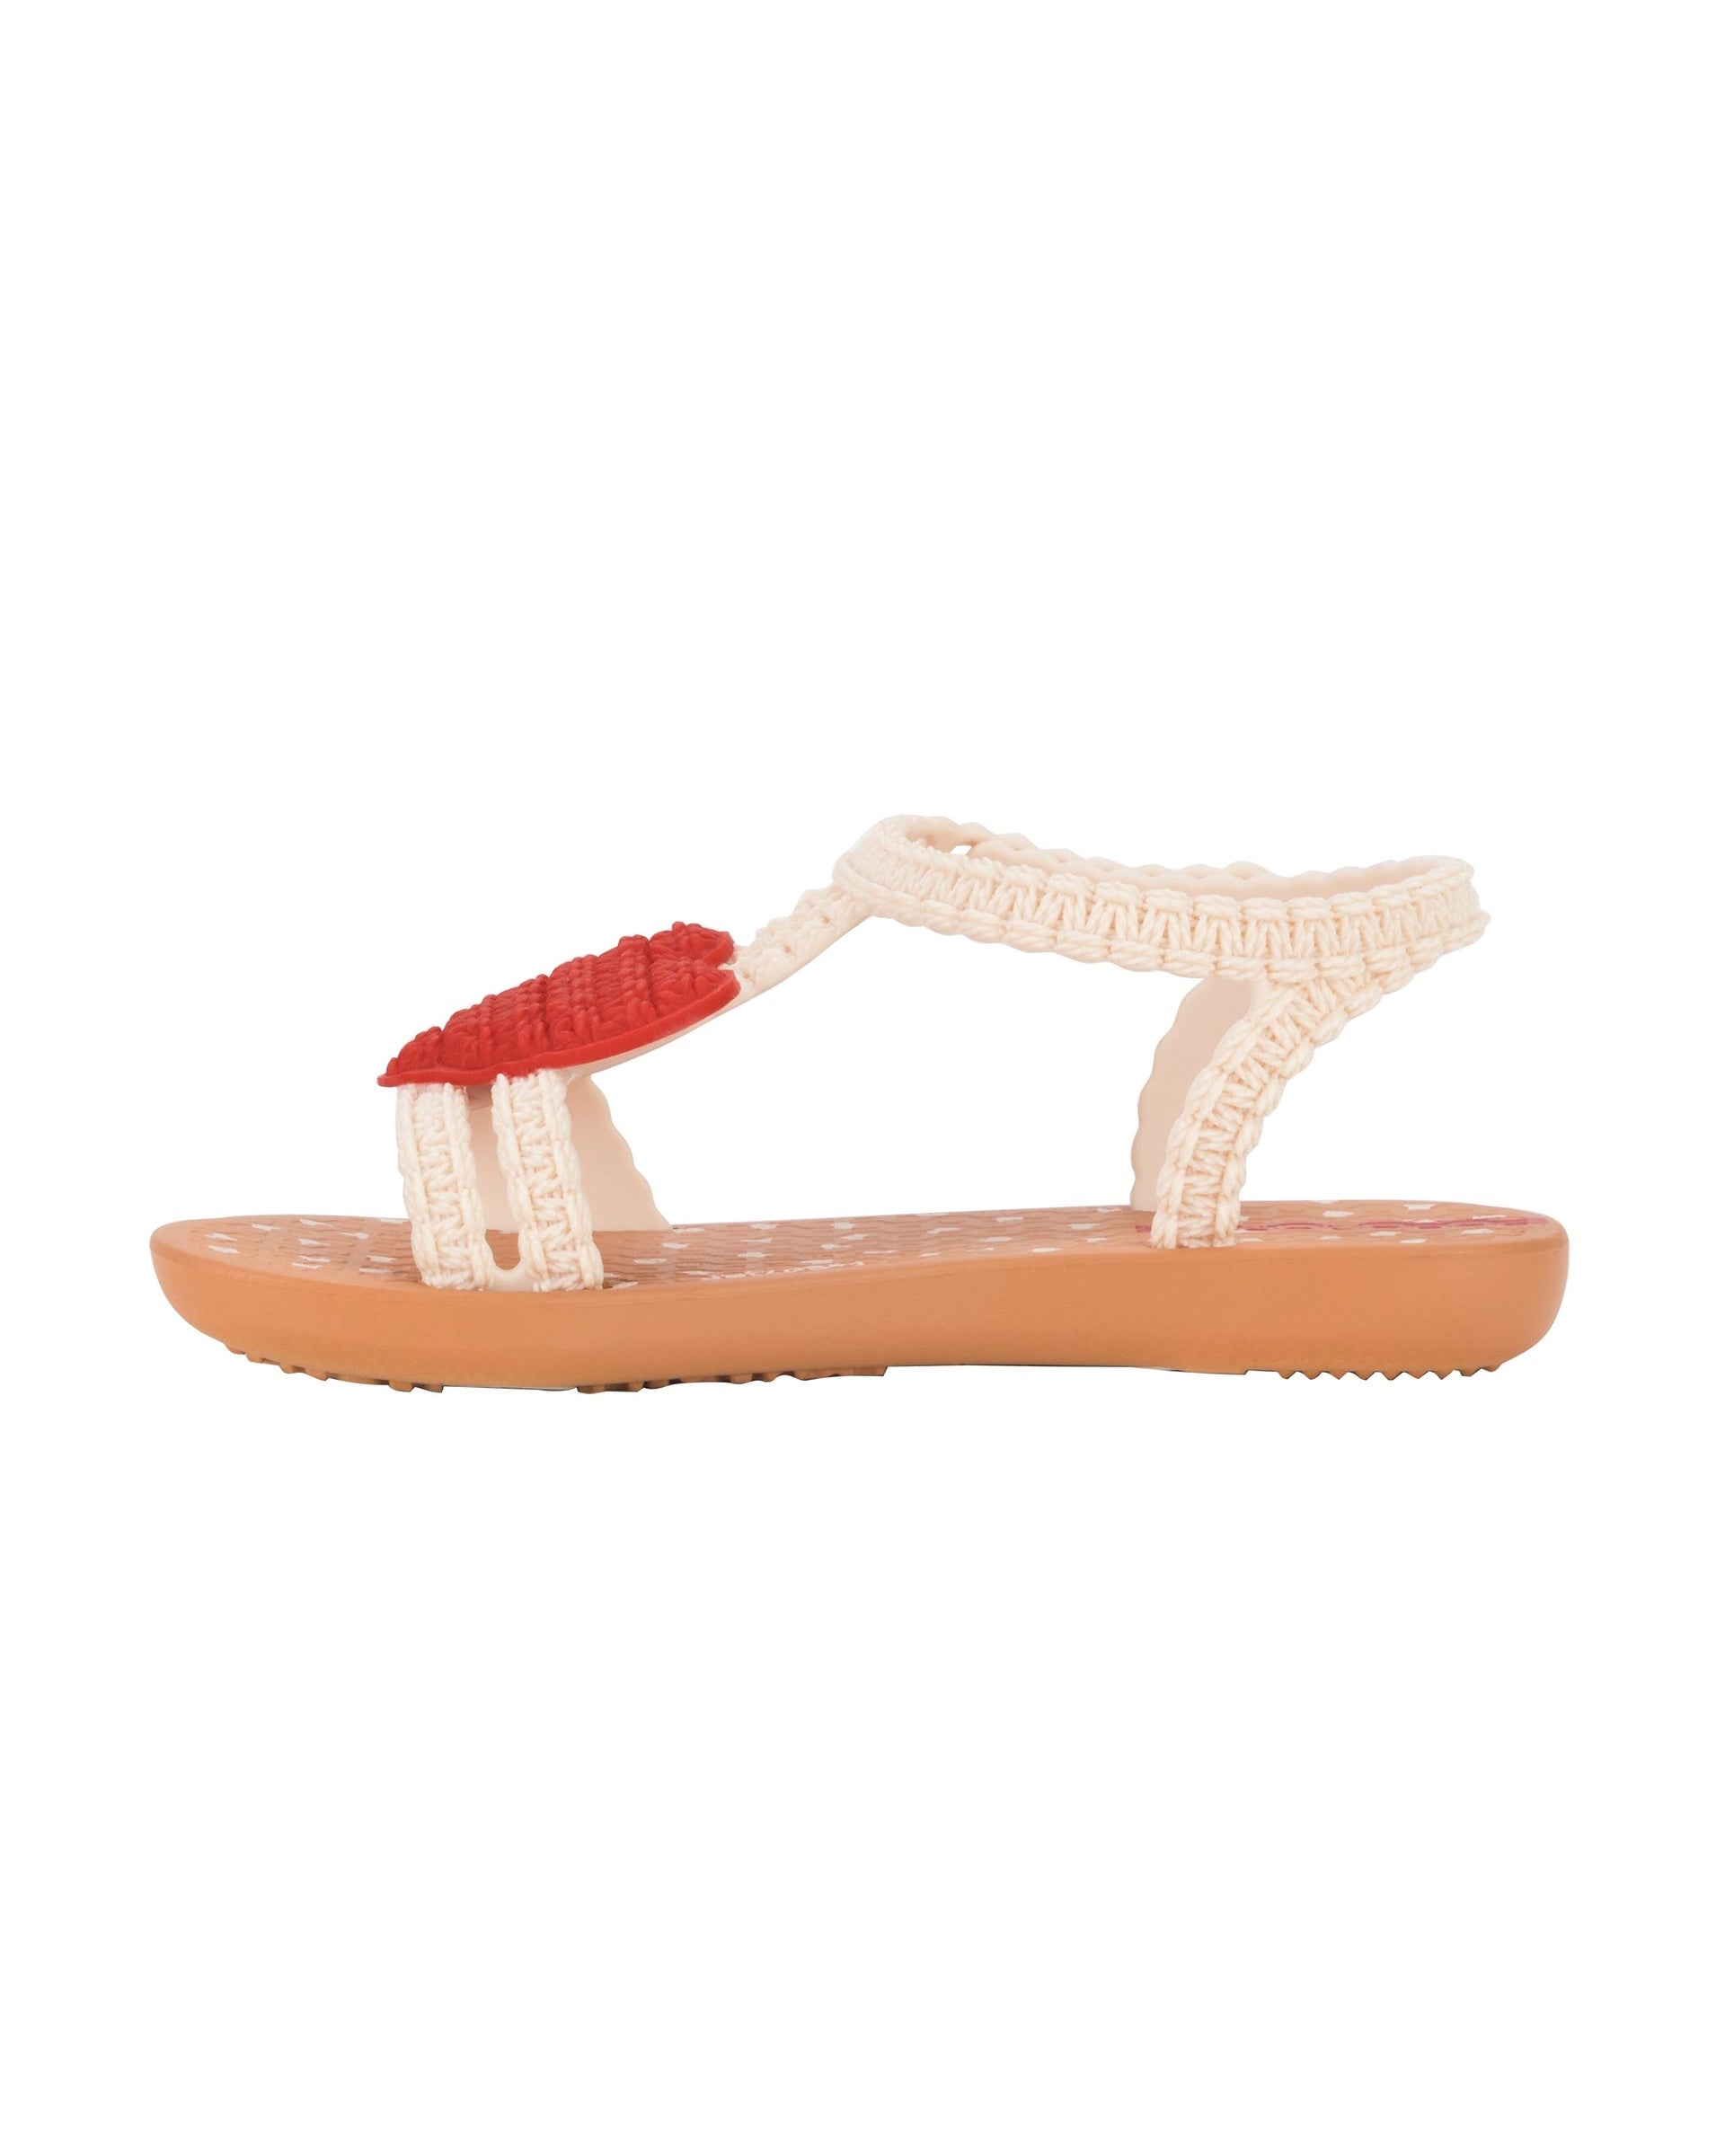 Inner side view of a beige Ipanema My First Ipanema baby sandal with red heart on top and crochet texture .